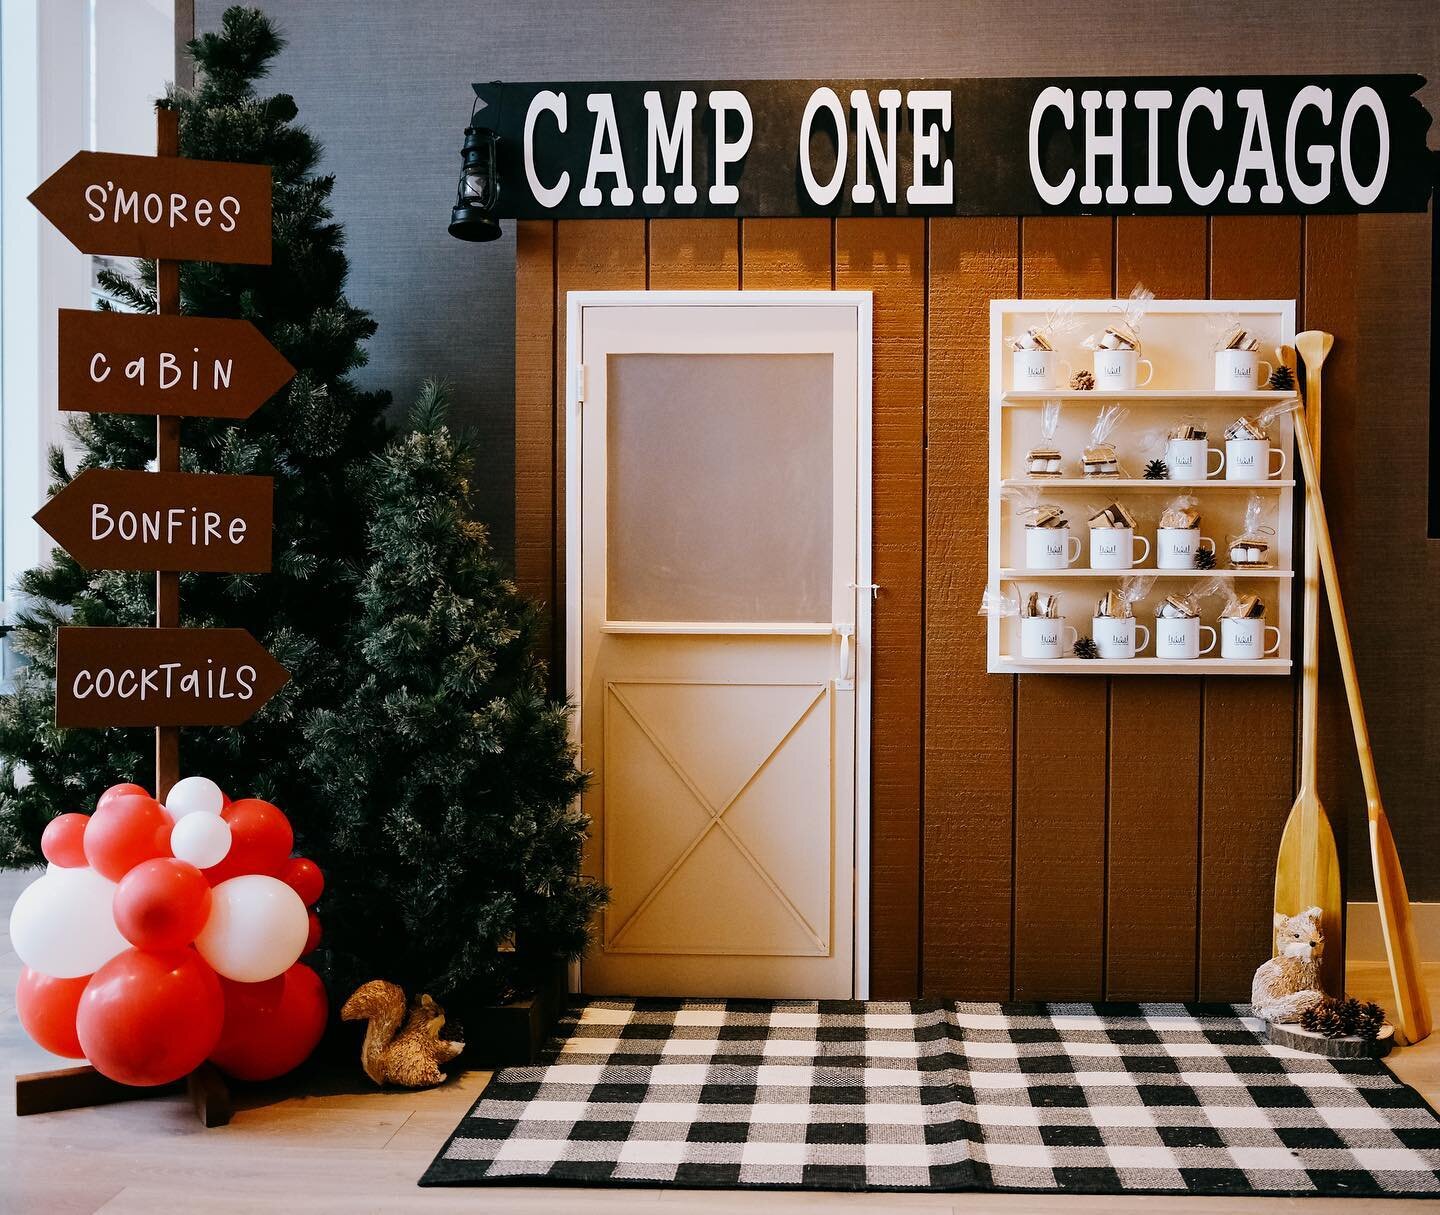 Gather &lsquo;round the bonfire, campers! 🪵

We had so much fun bringing Camp One Chicago to life for @liveonechicago this month! We served up fabulous fall cocktails in custom mugs alongside delicious s&rsquo;more kits, a killer Fall playlist and i